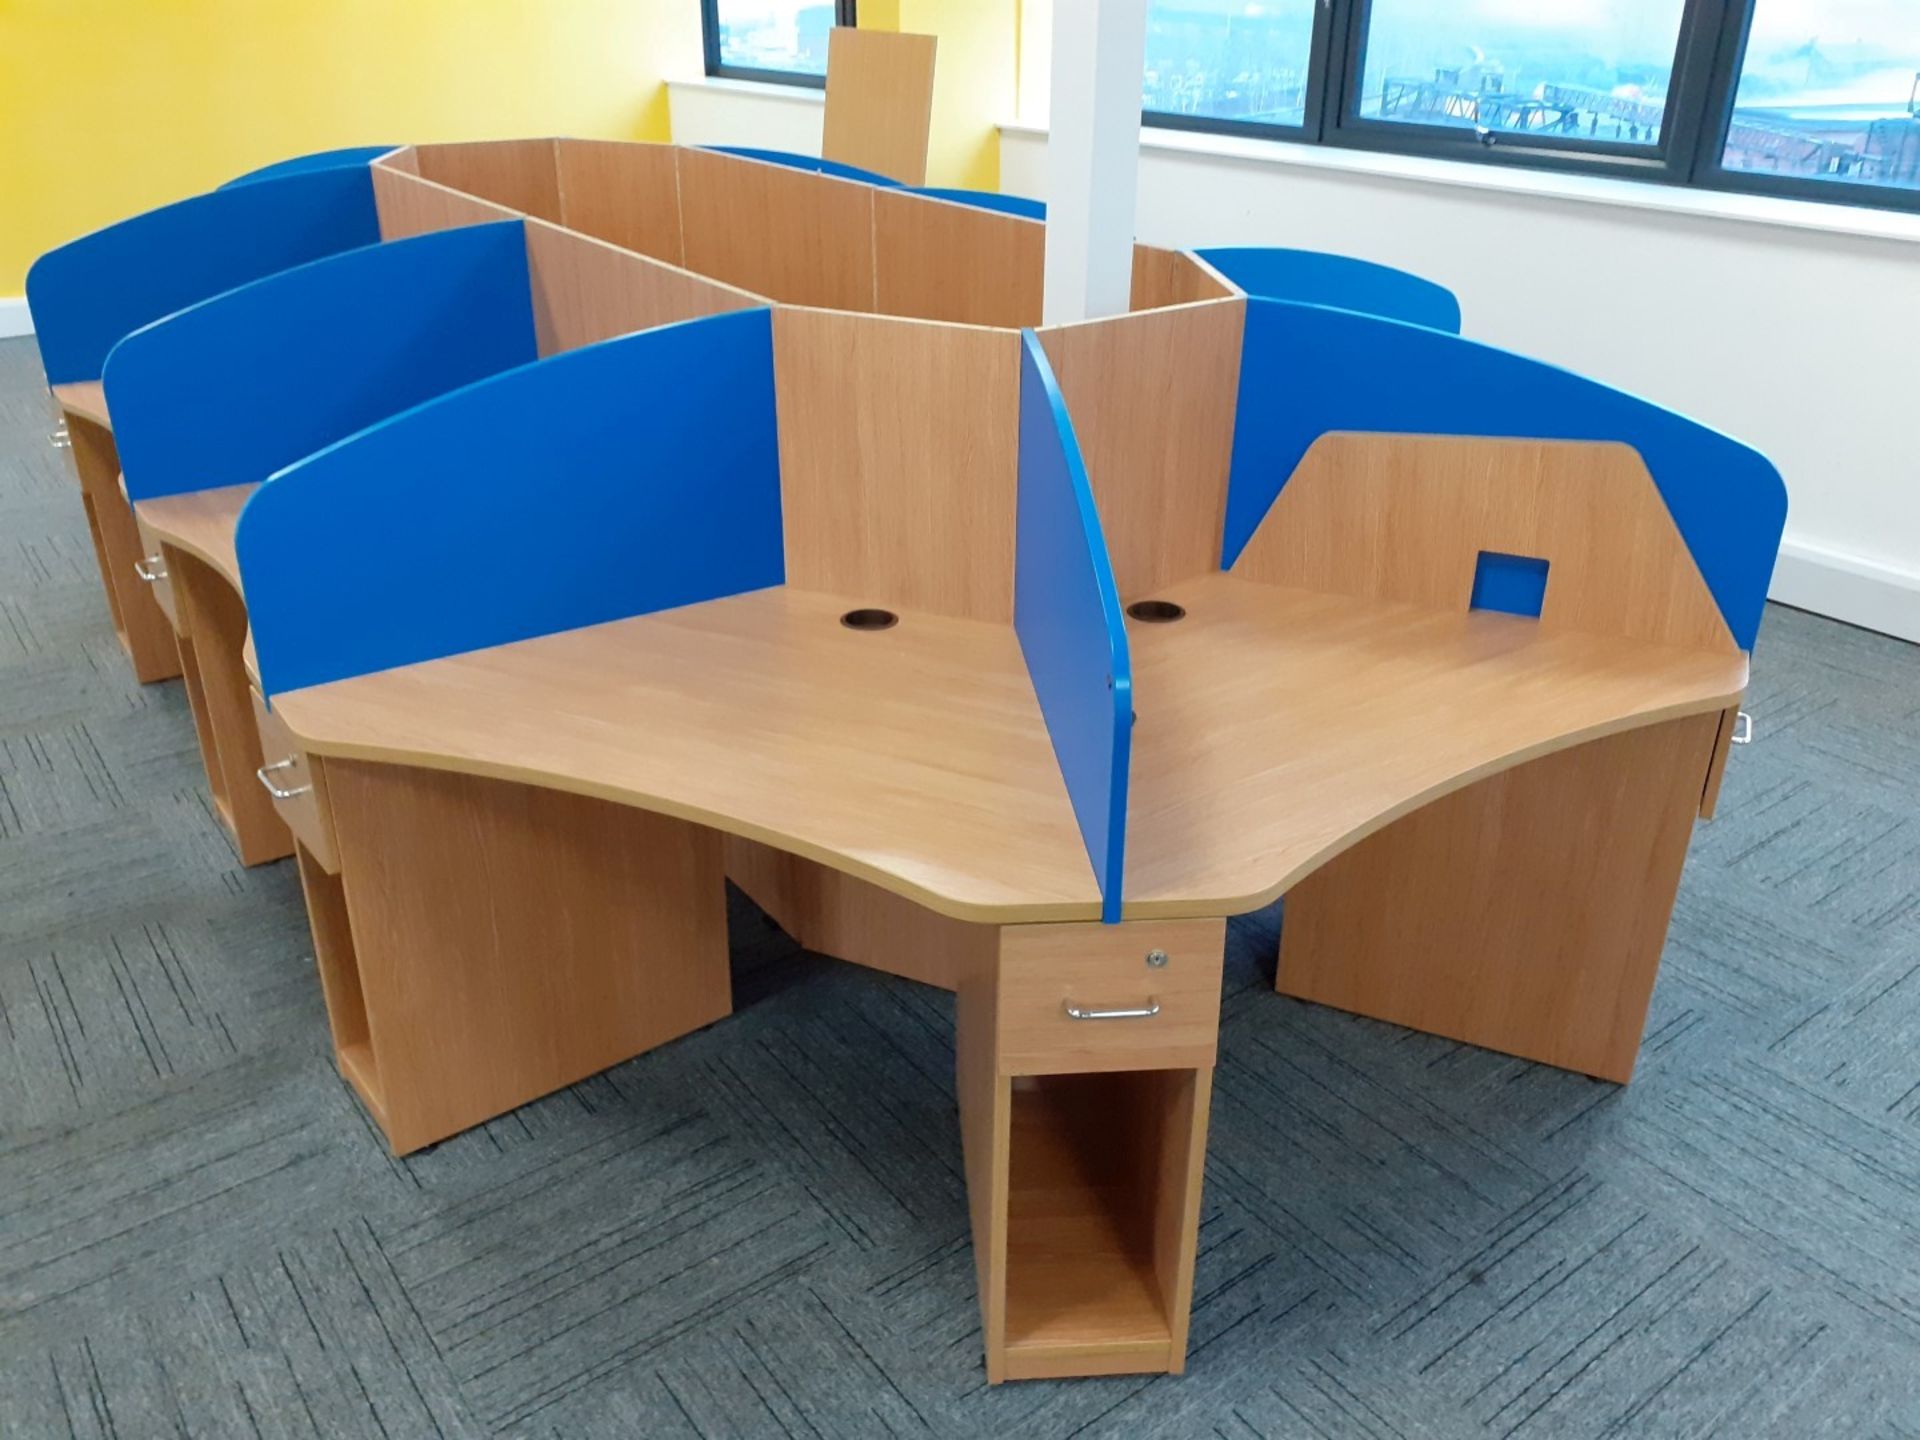 1 x 10-Desk Office Workstation Pod With Privacy Partitions In A Beech Finish - Original RRP £3,987 - Image 4 of 6